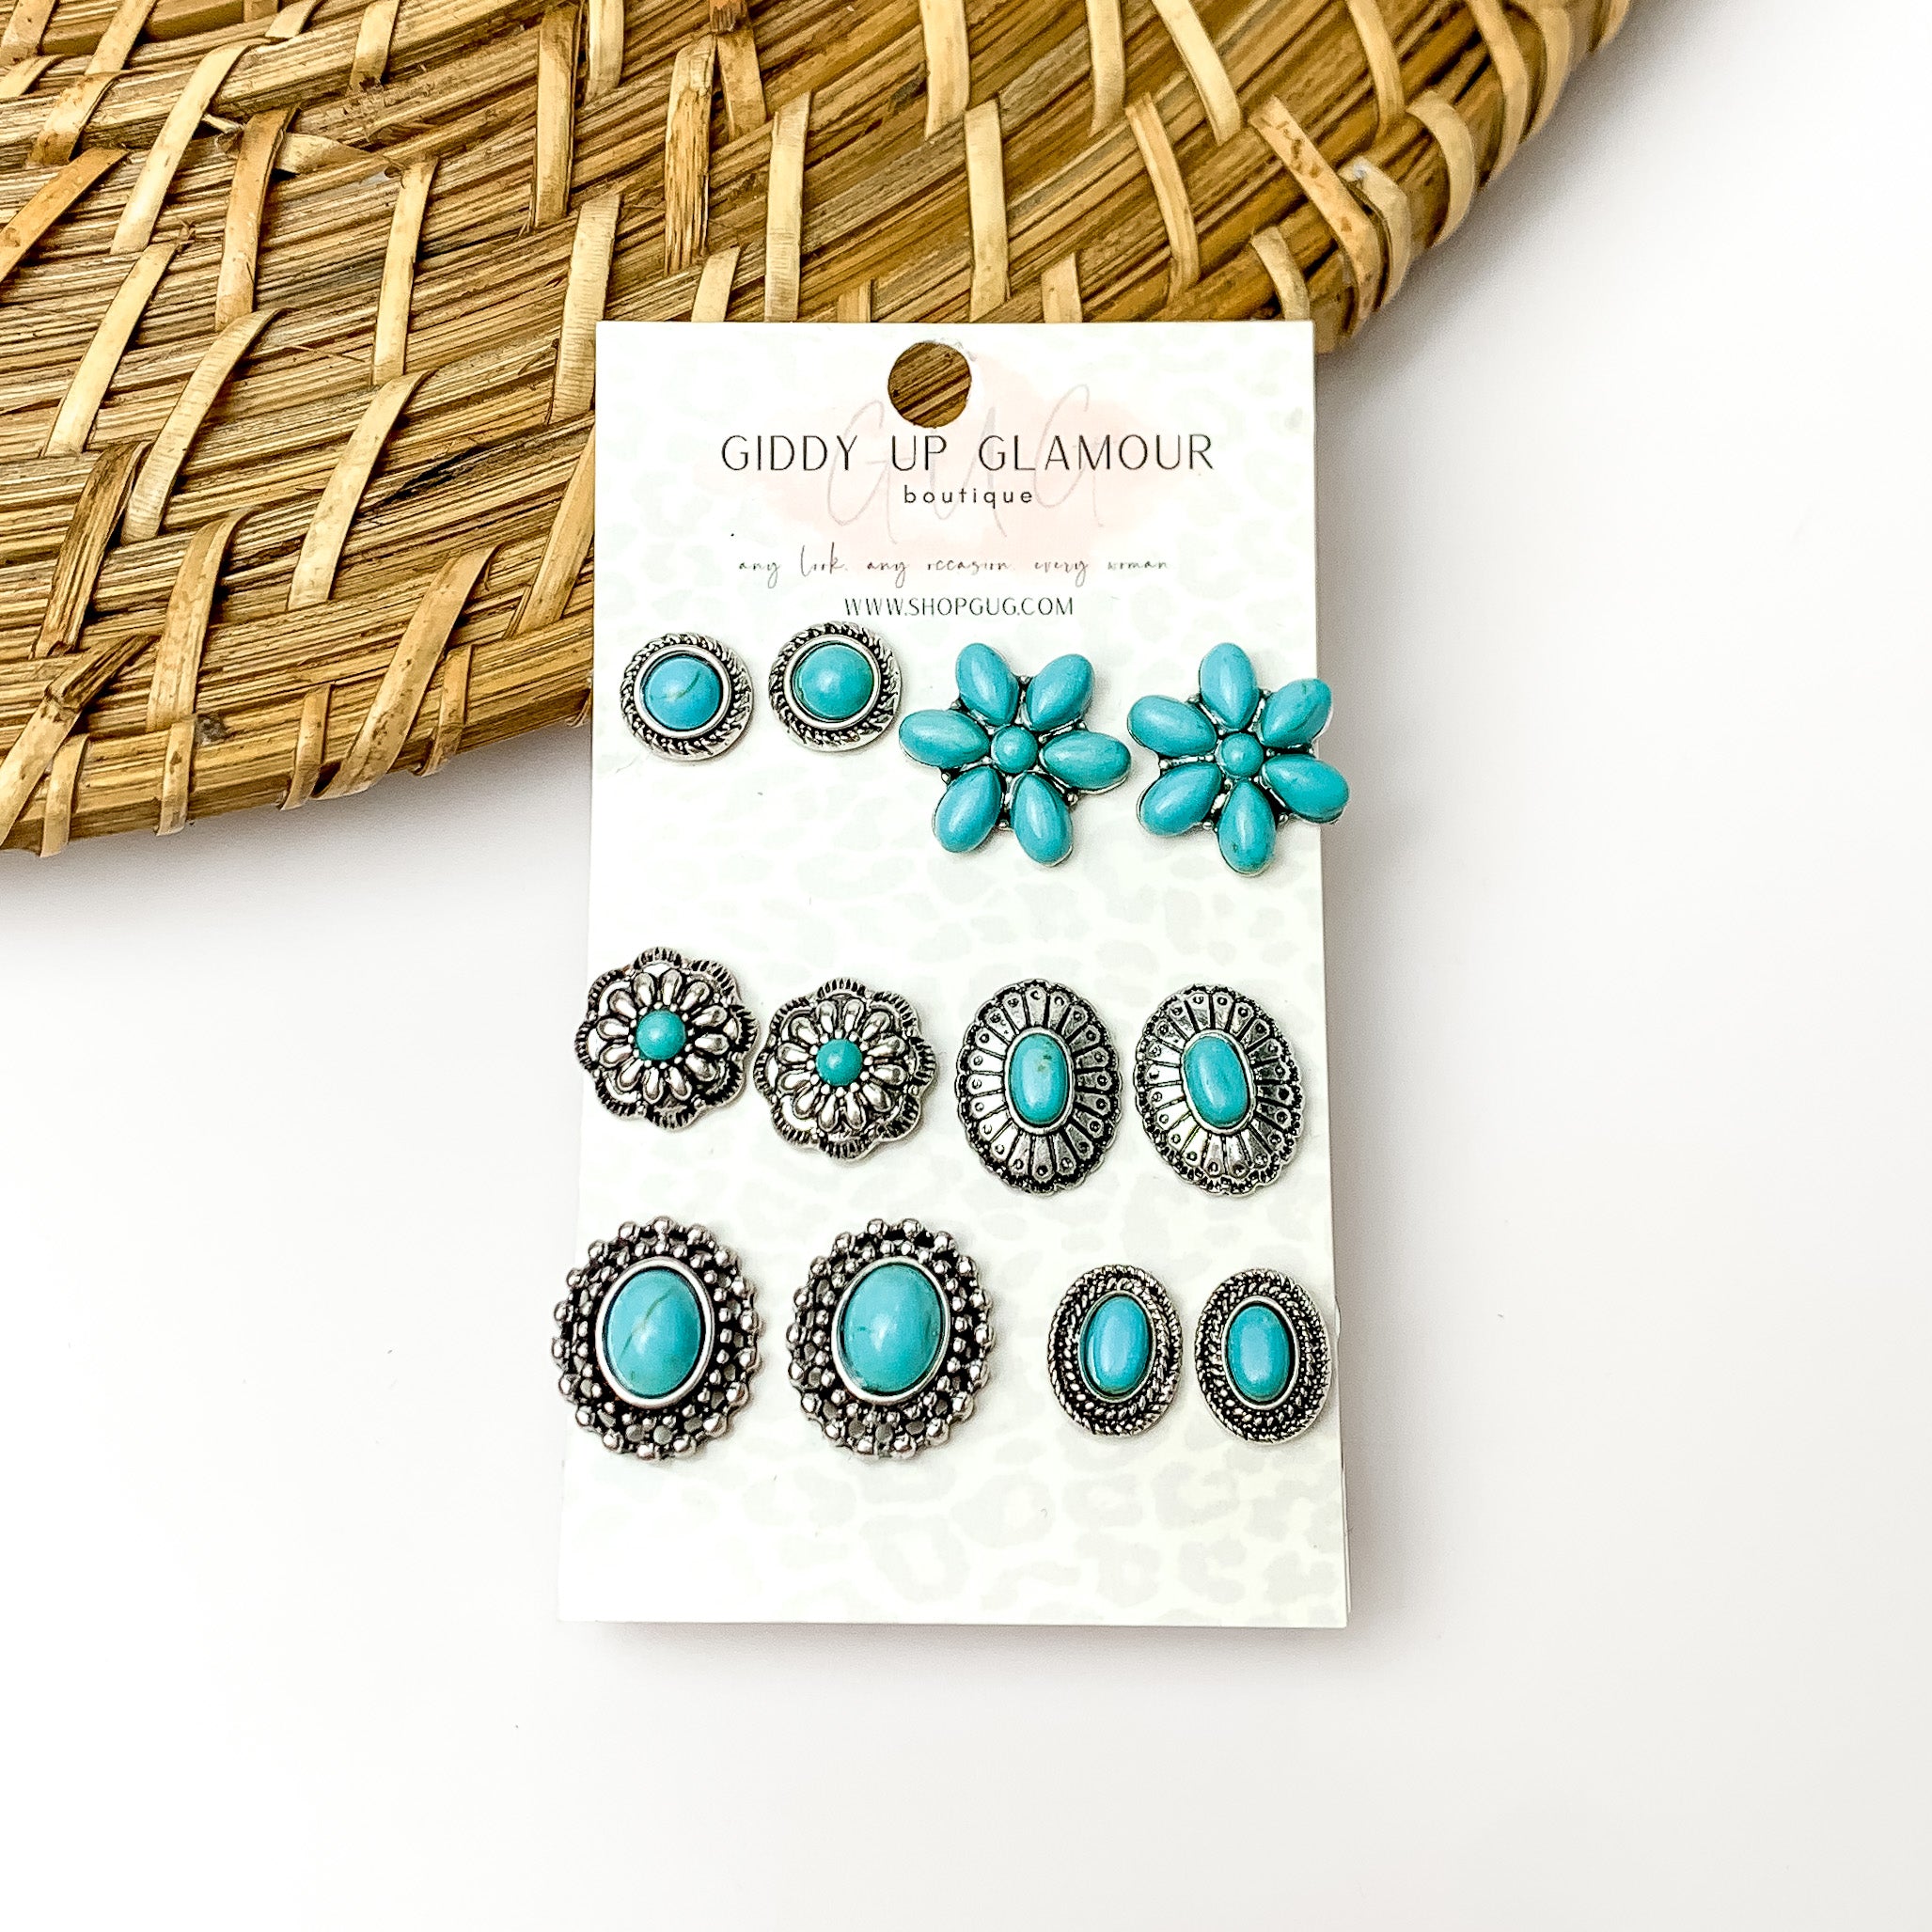 Set of six turquois and silver designed earrings. Pictured on a white background with a wood like decoration in the top left corner.